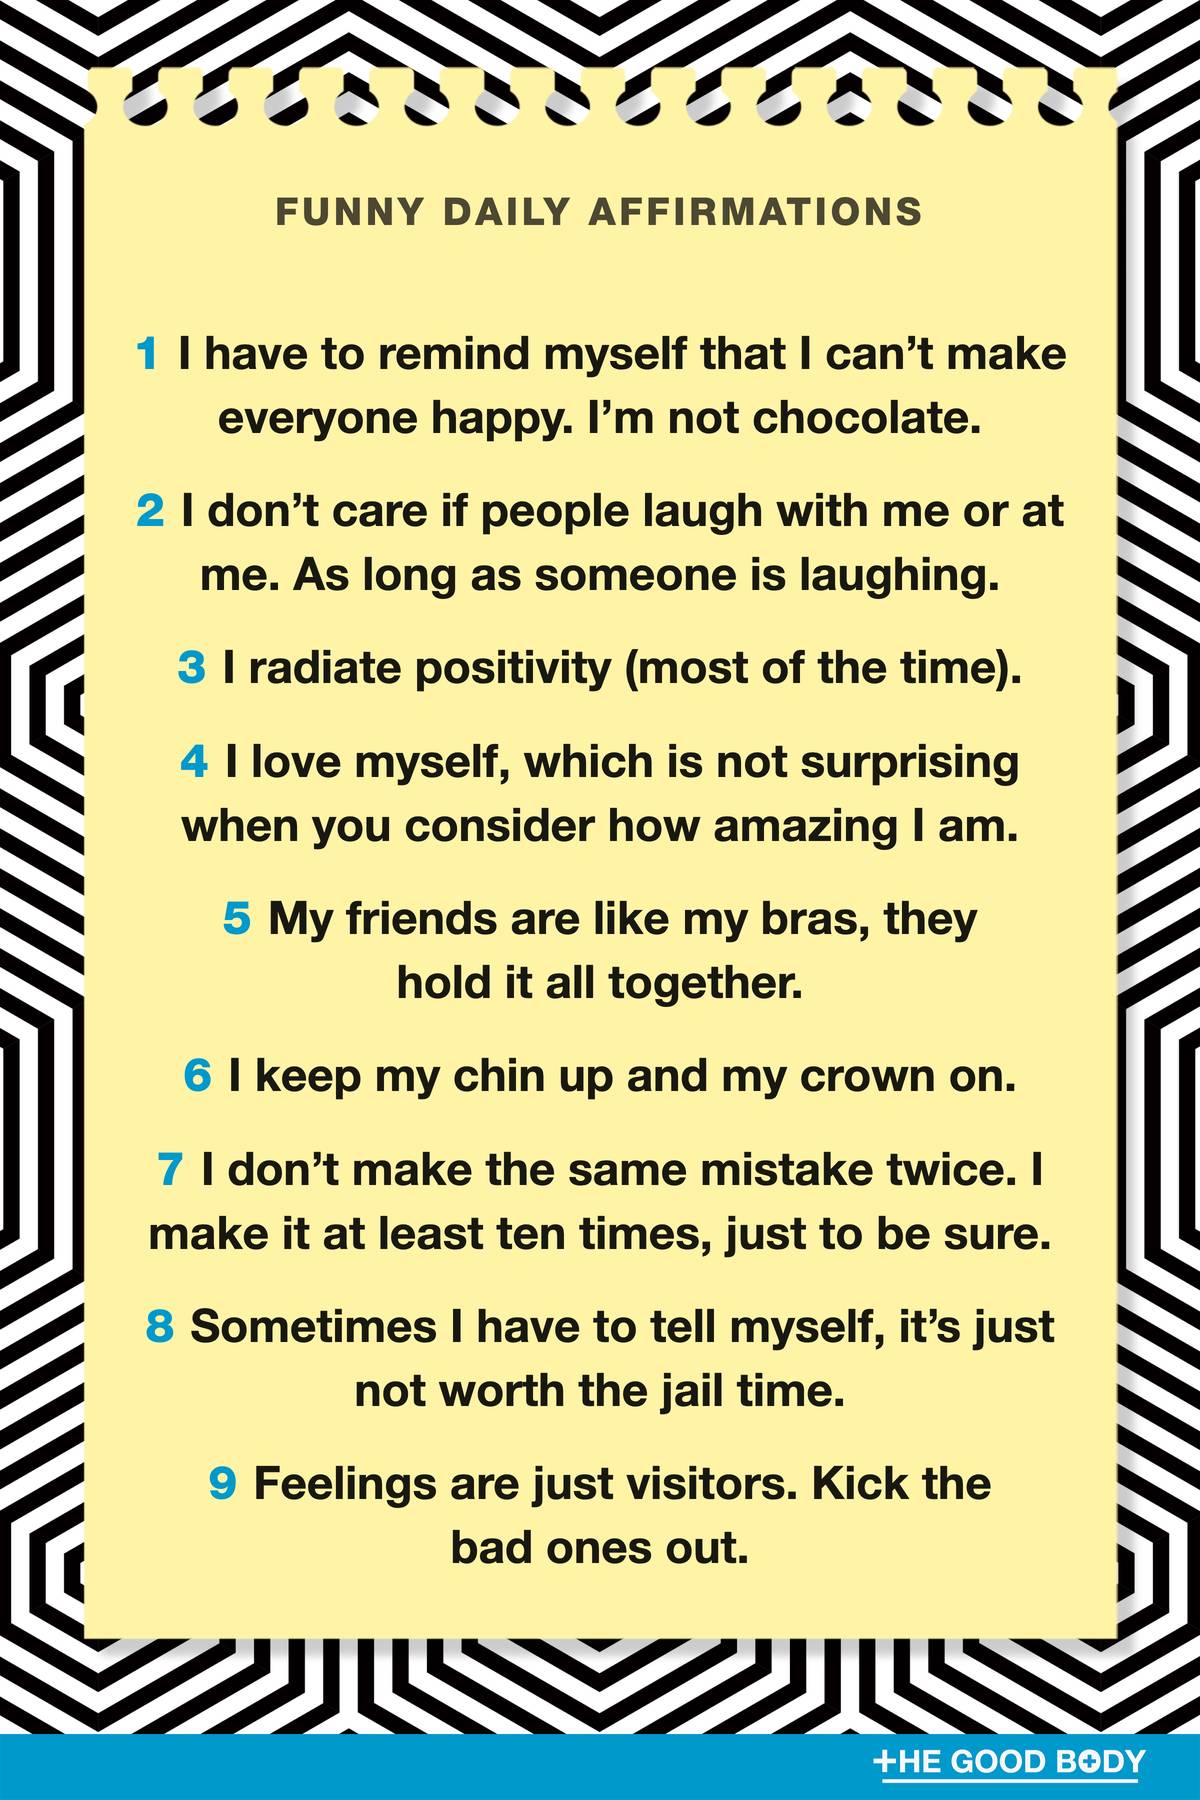 9 Funny Daily Affirmations on Yellow Note Paper with Optical Illusion Background